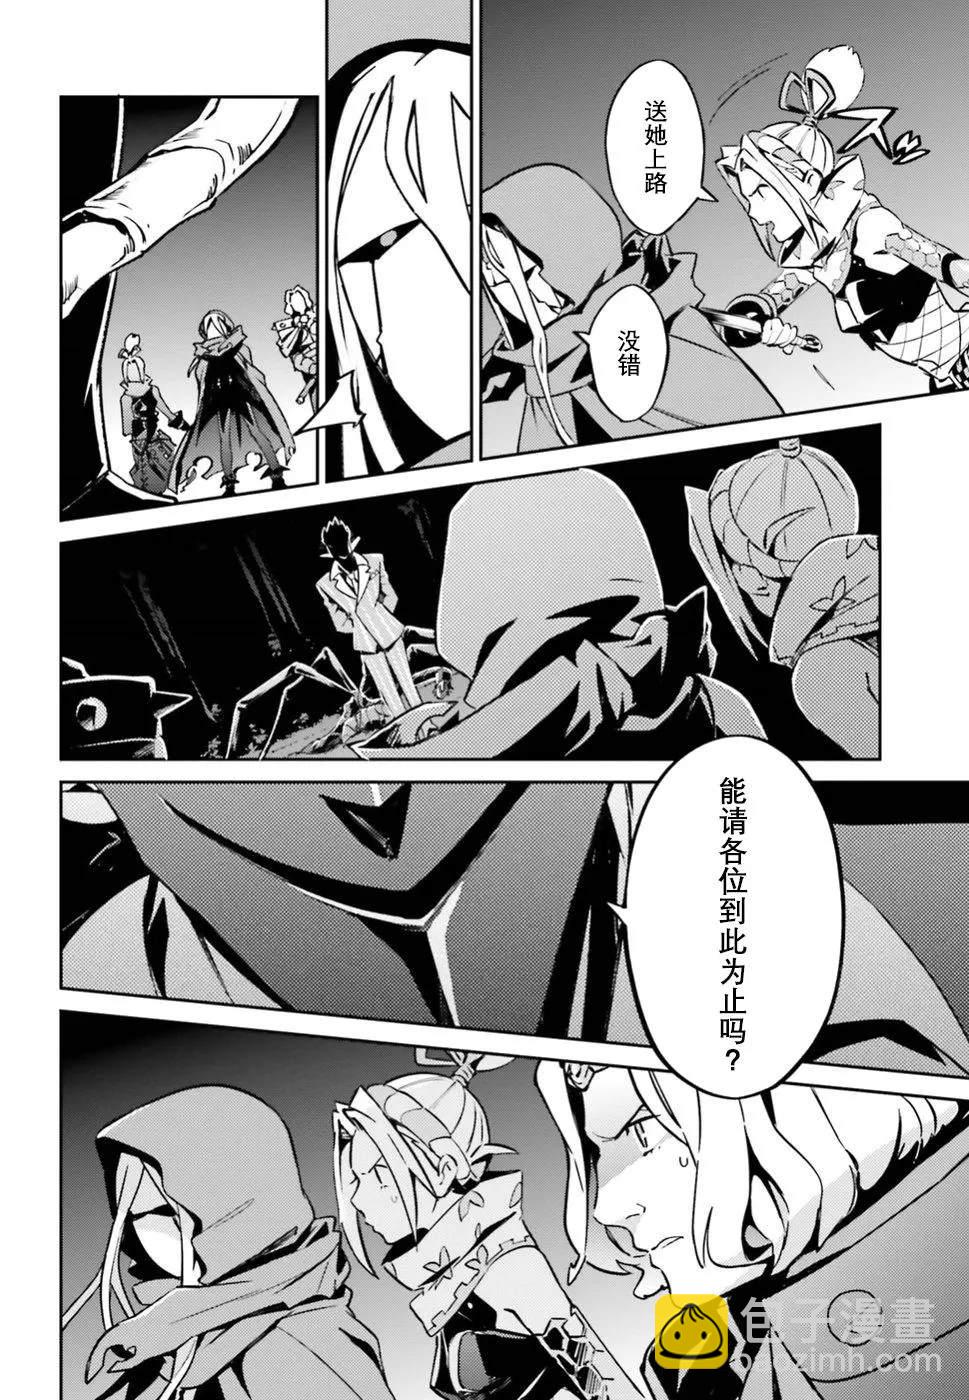 OVERLORD - 第46话 - 3